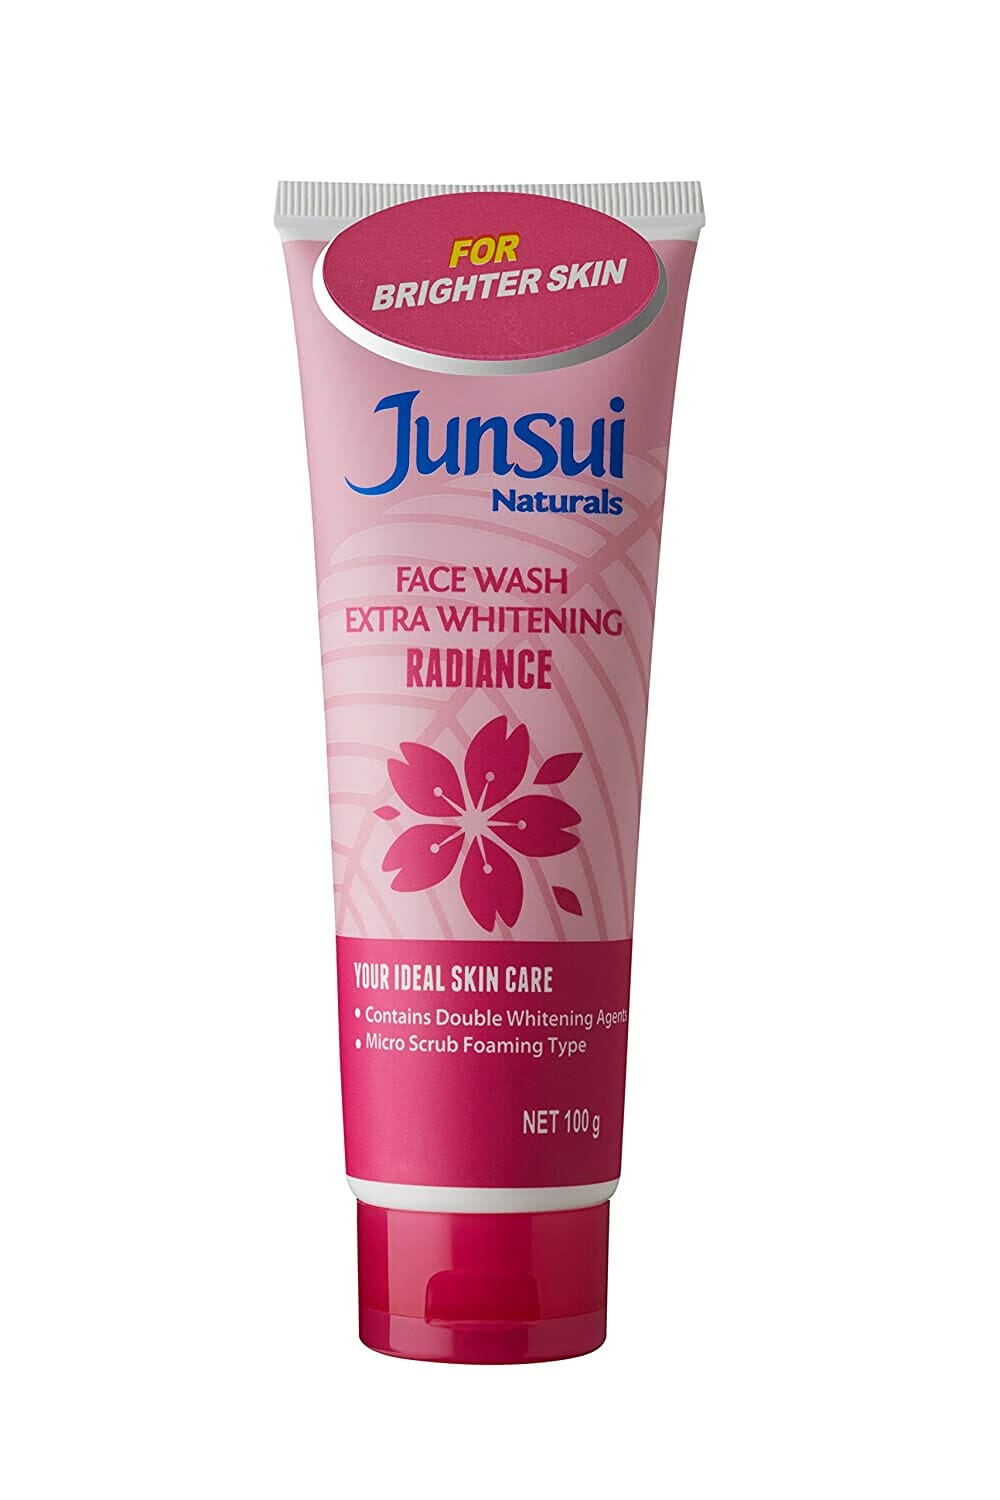 Junsui Naturals Face Wash Whitening Radiance 100g Best Face Wash in Pakistan